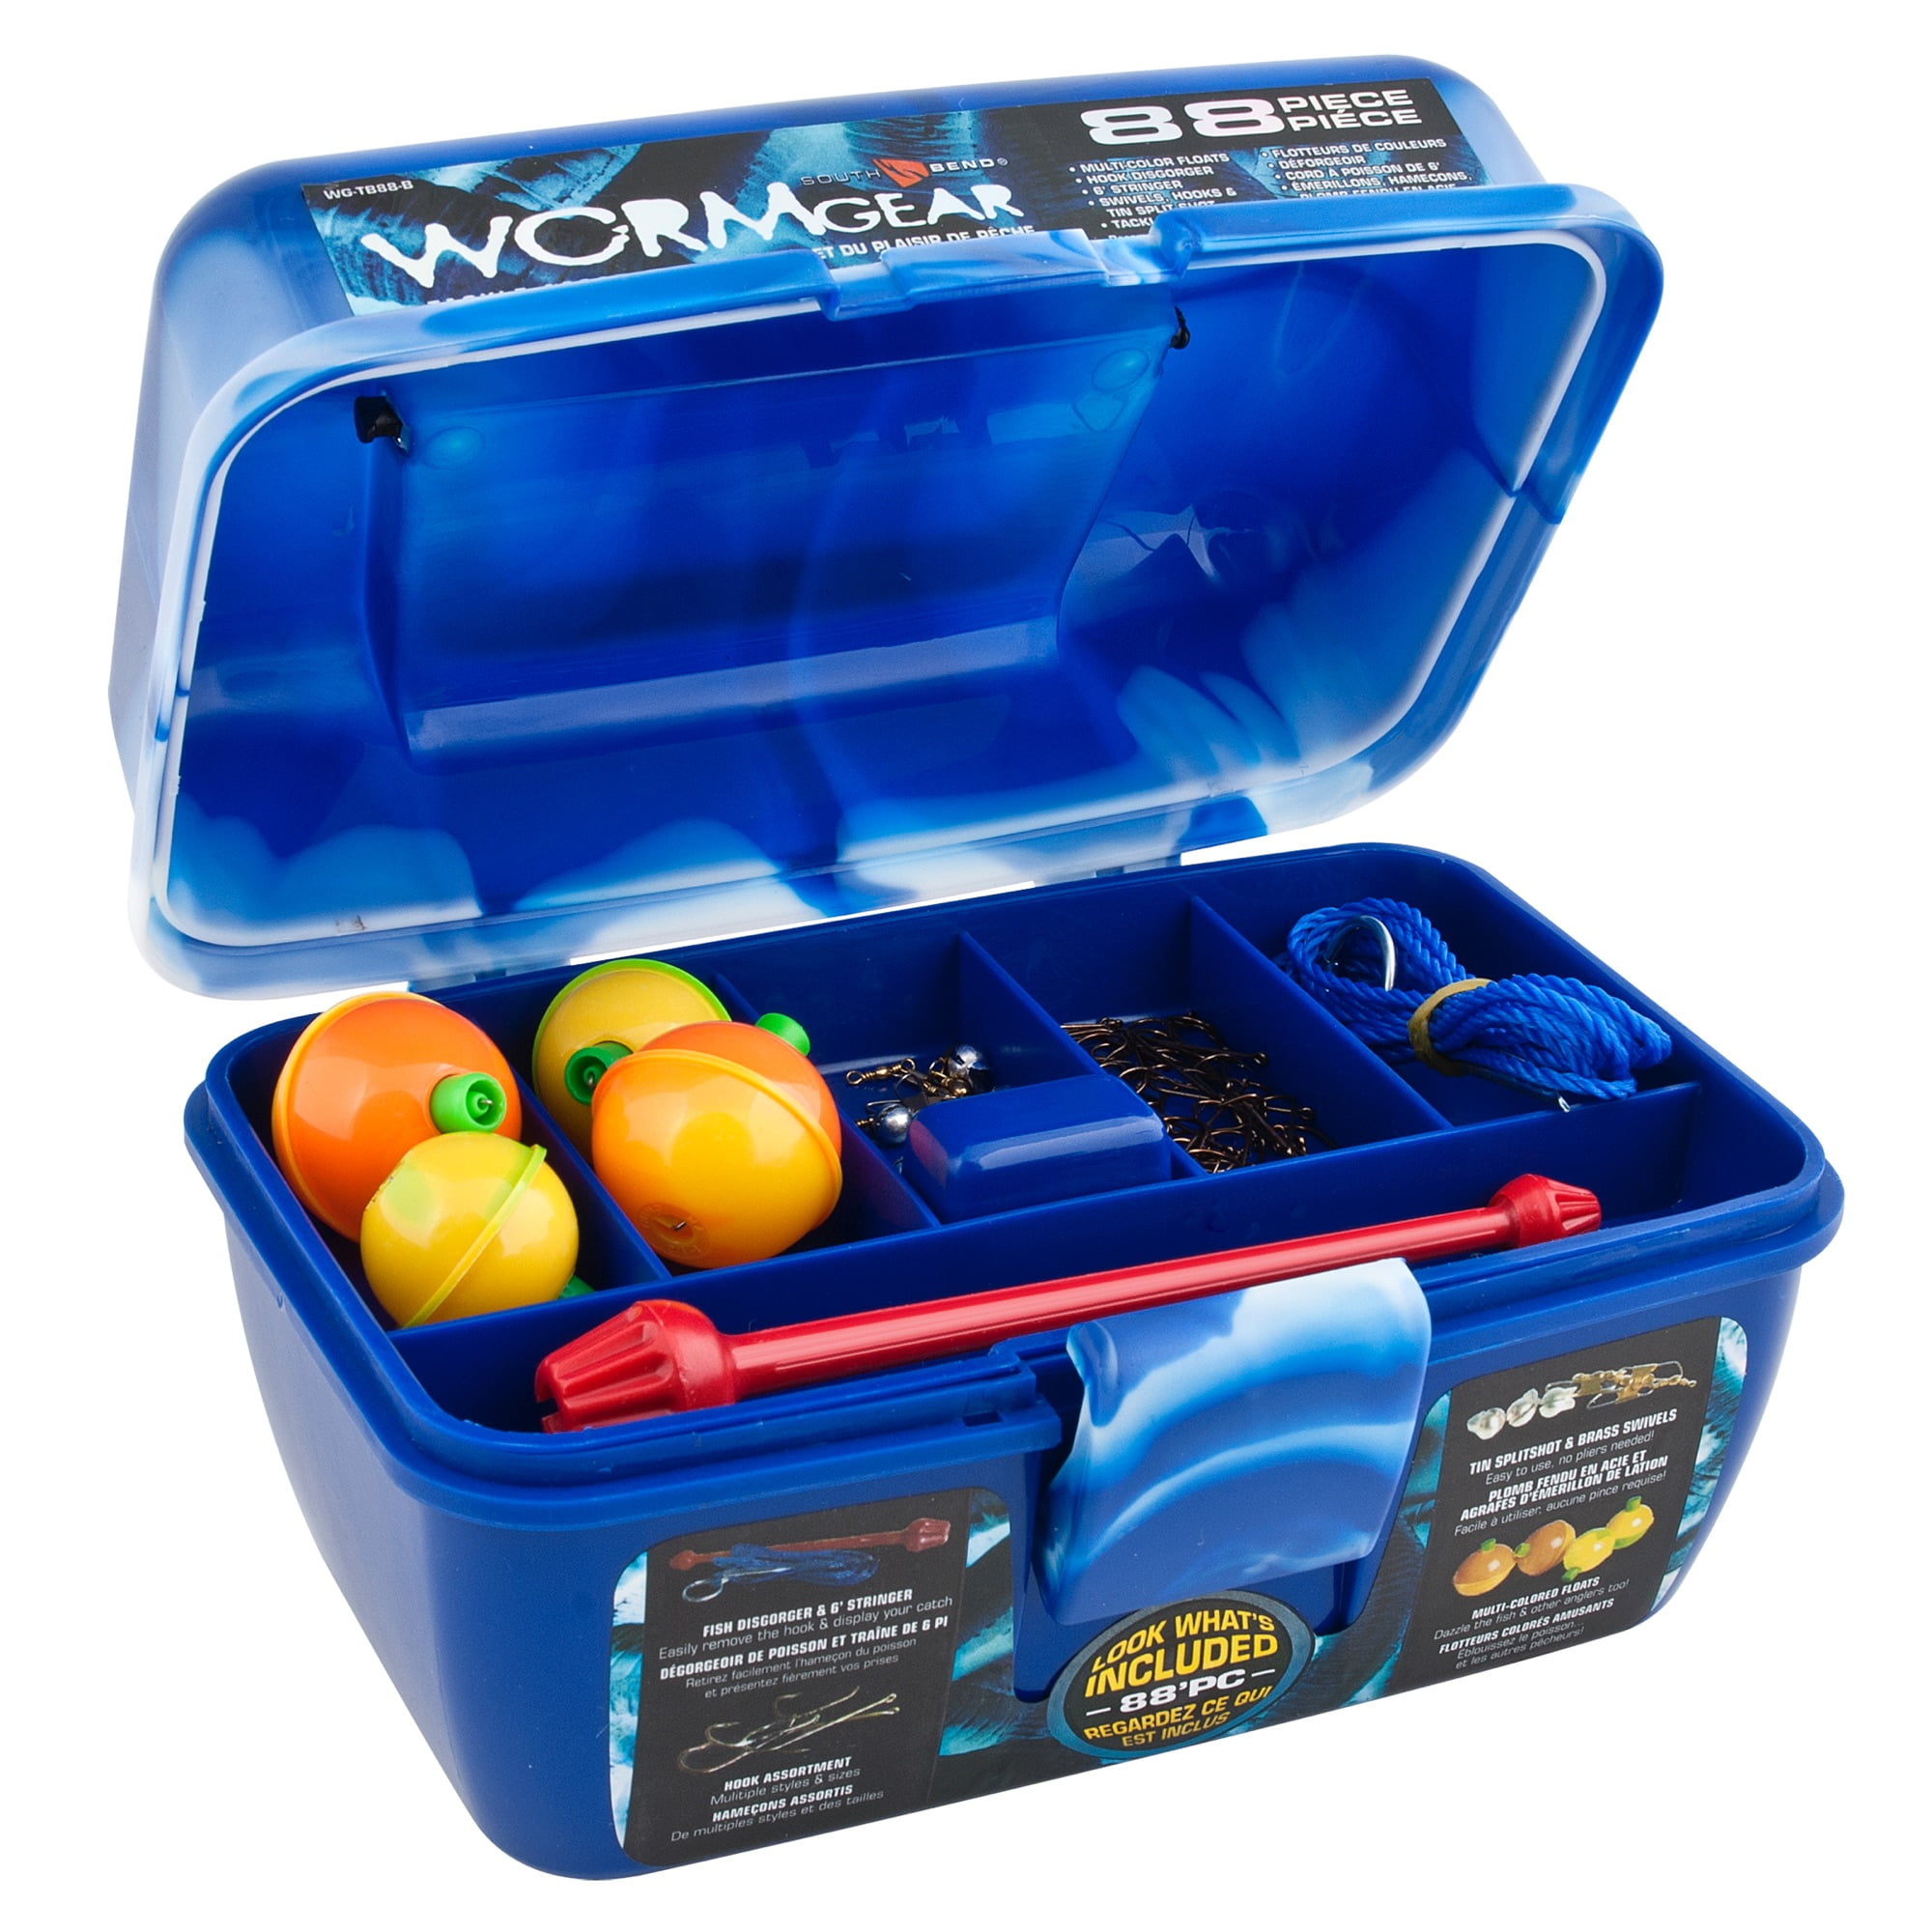 South Bend Wormgear Tackle Box-88 Piece Blue Free Shipping 